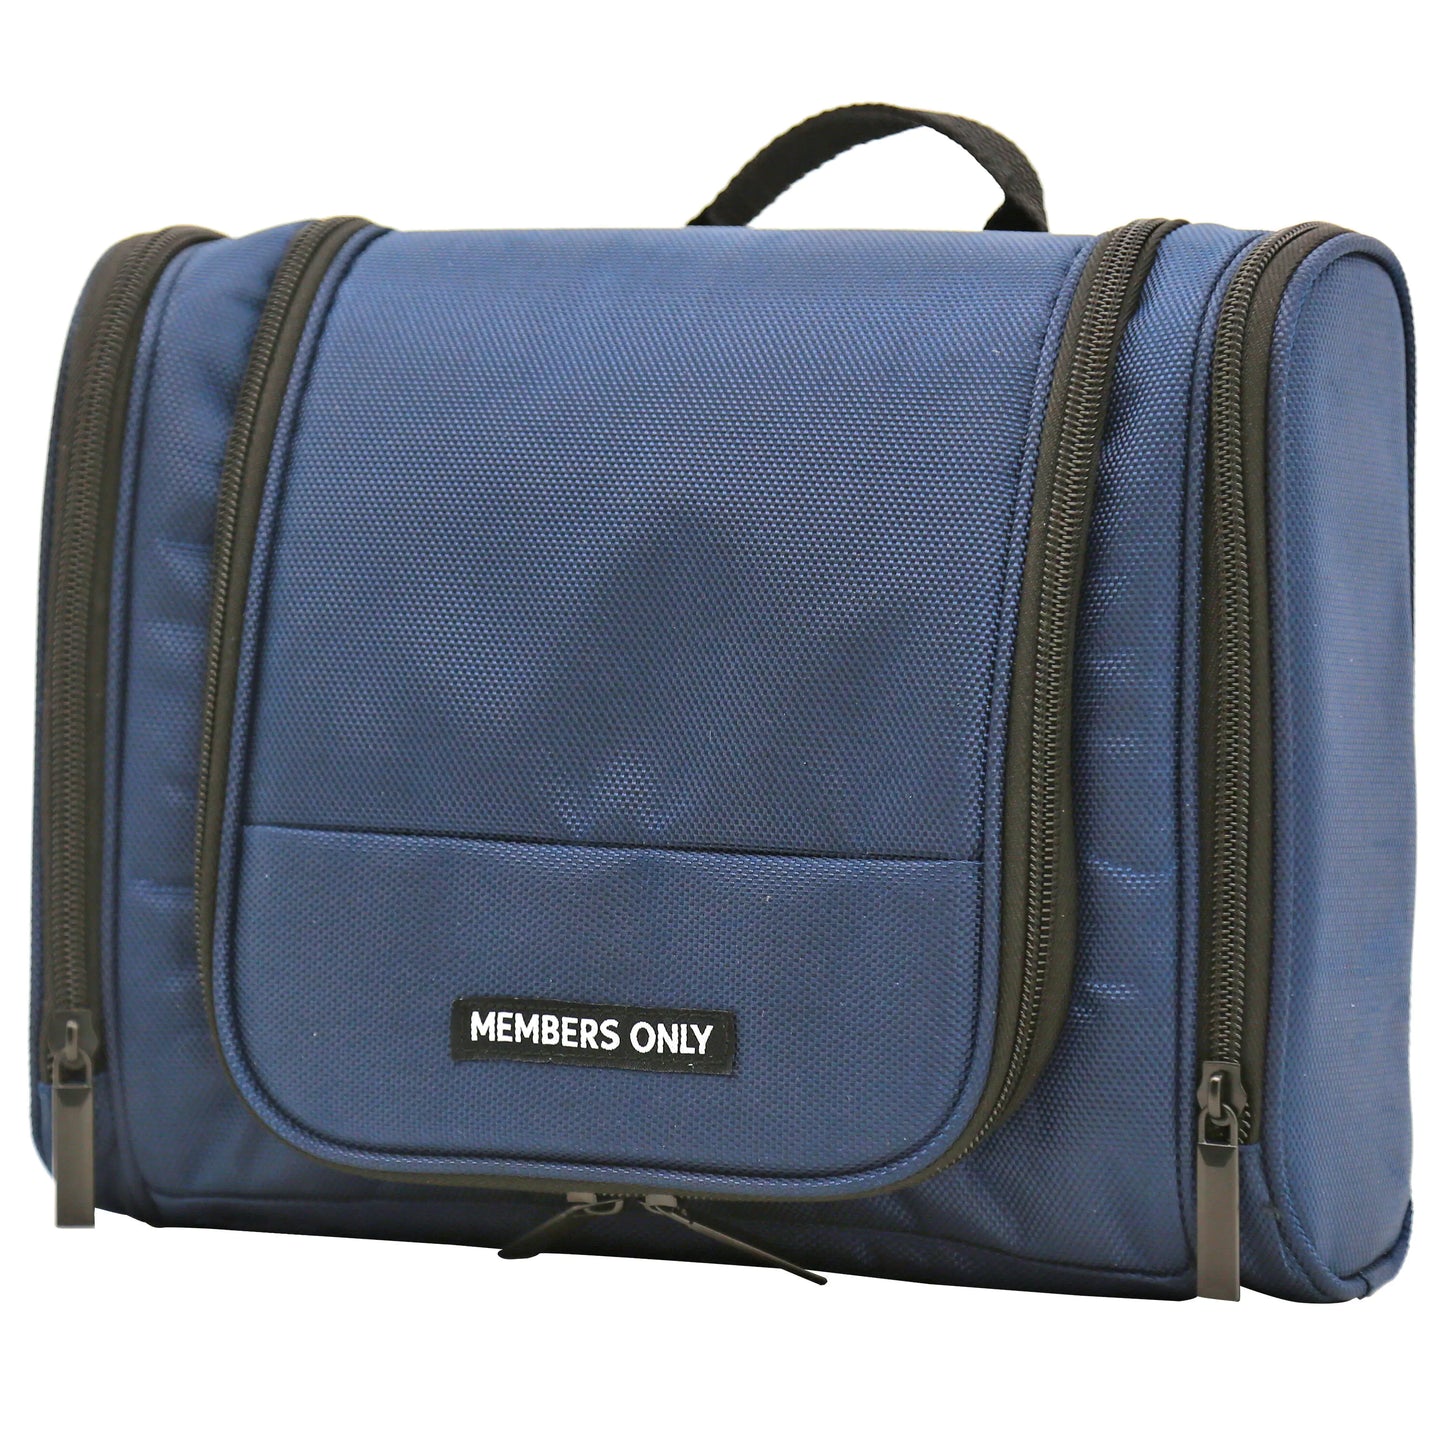 Members Only Hanging Toiletry Kit